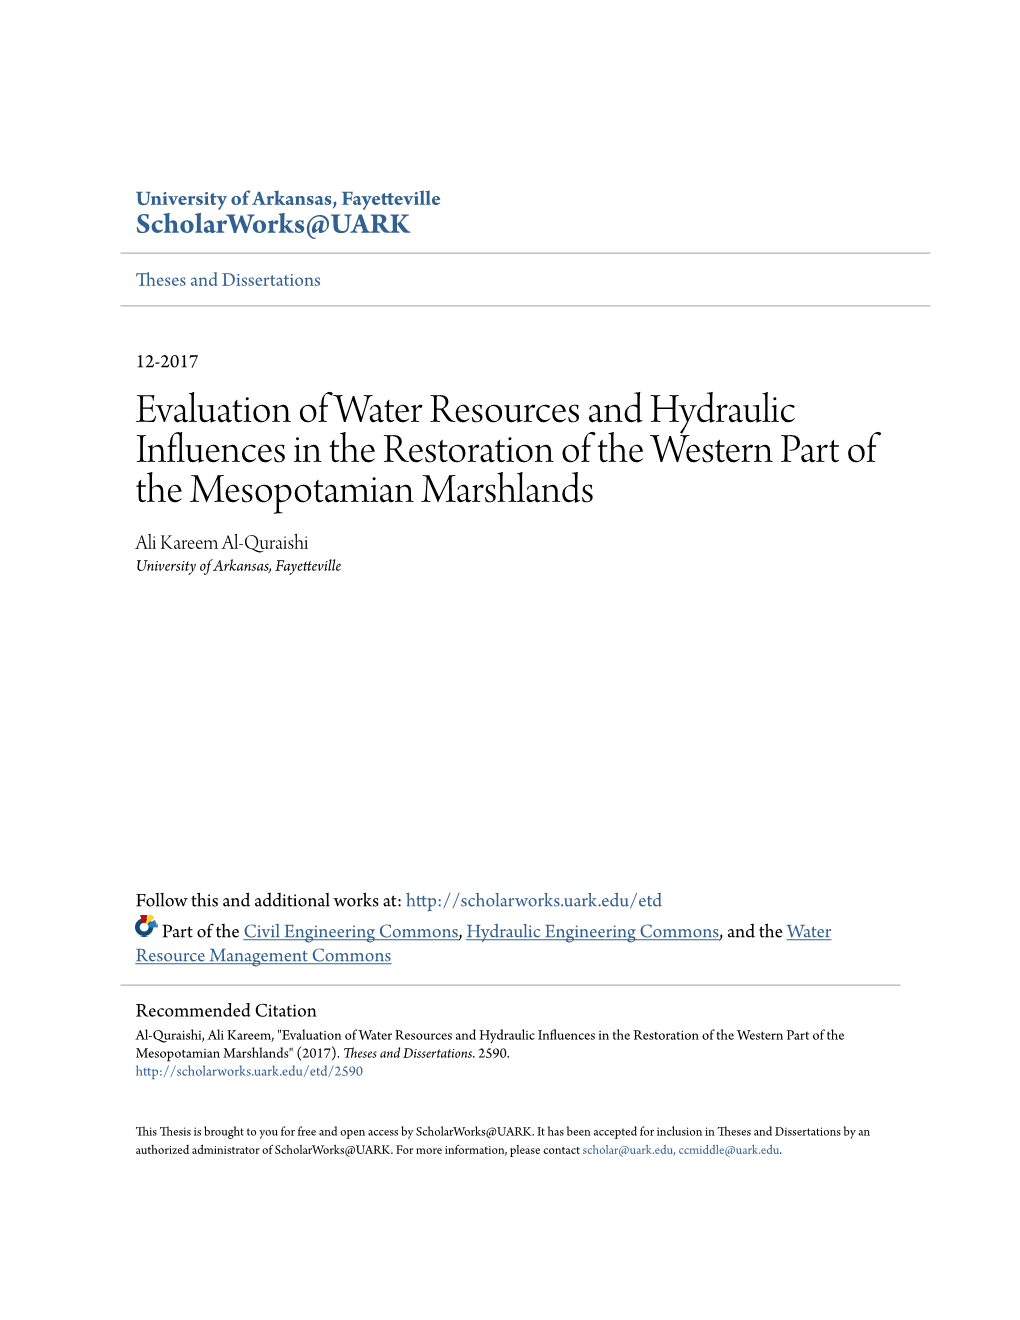 Evaluation of Water Resources and Hydraulic Influences in The